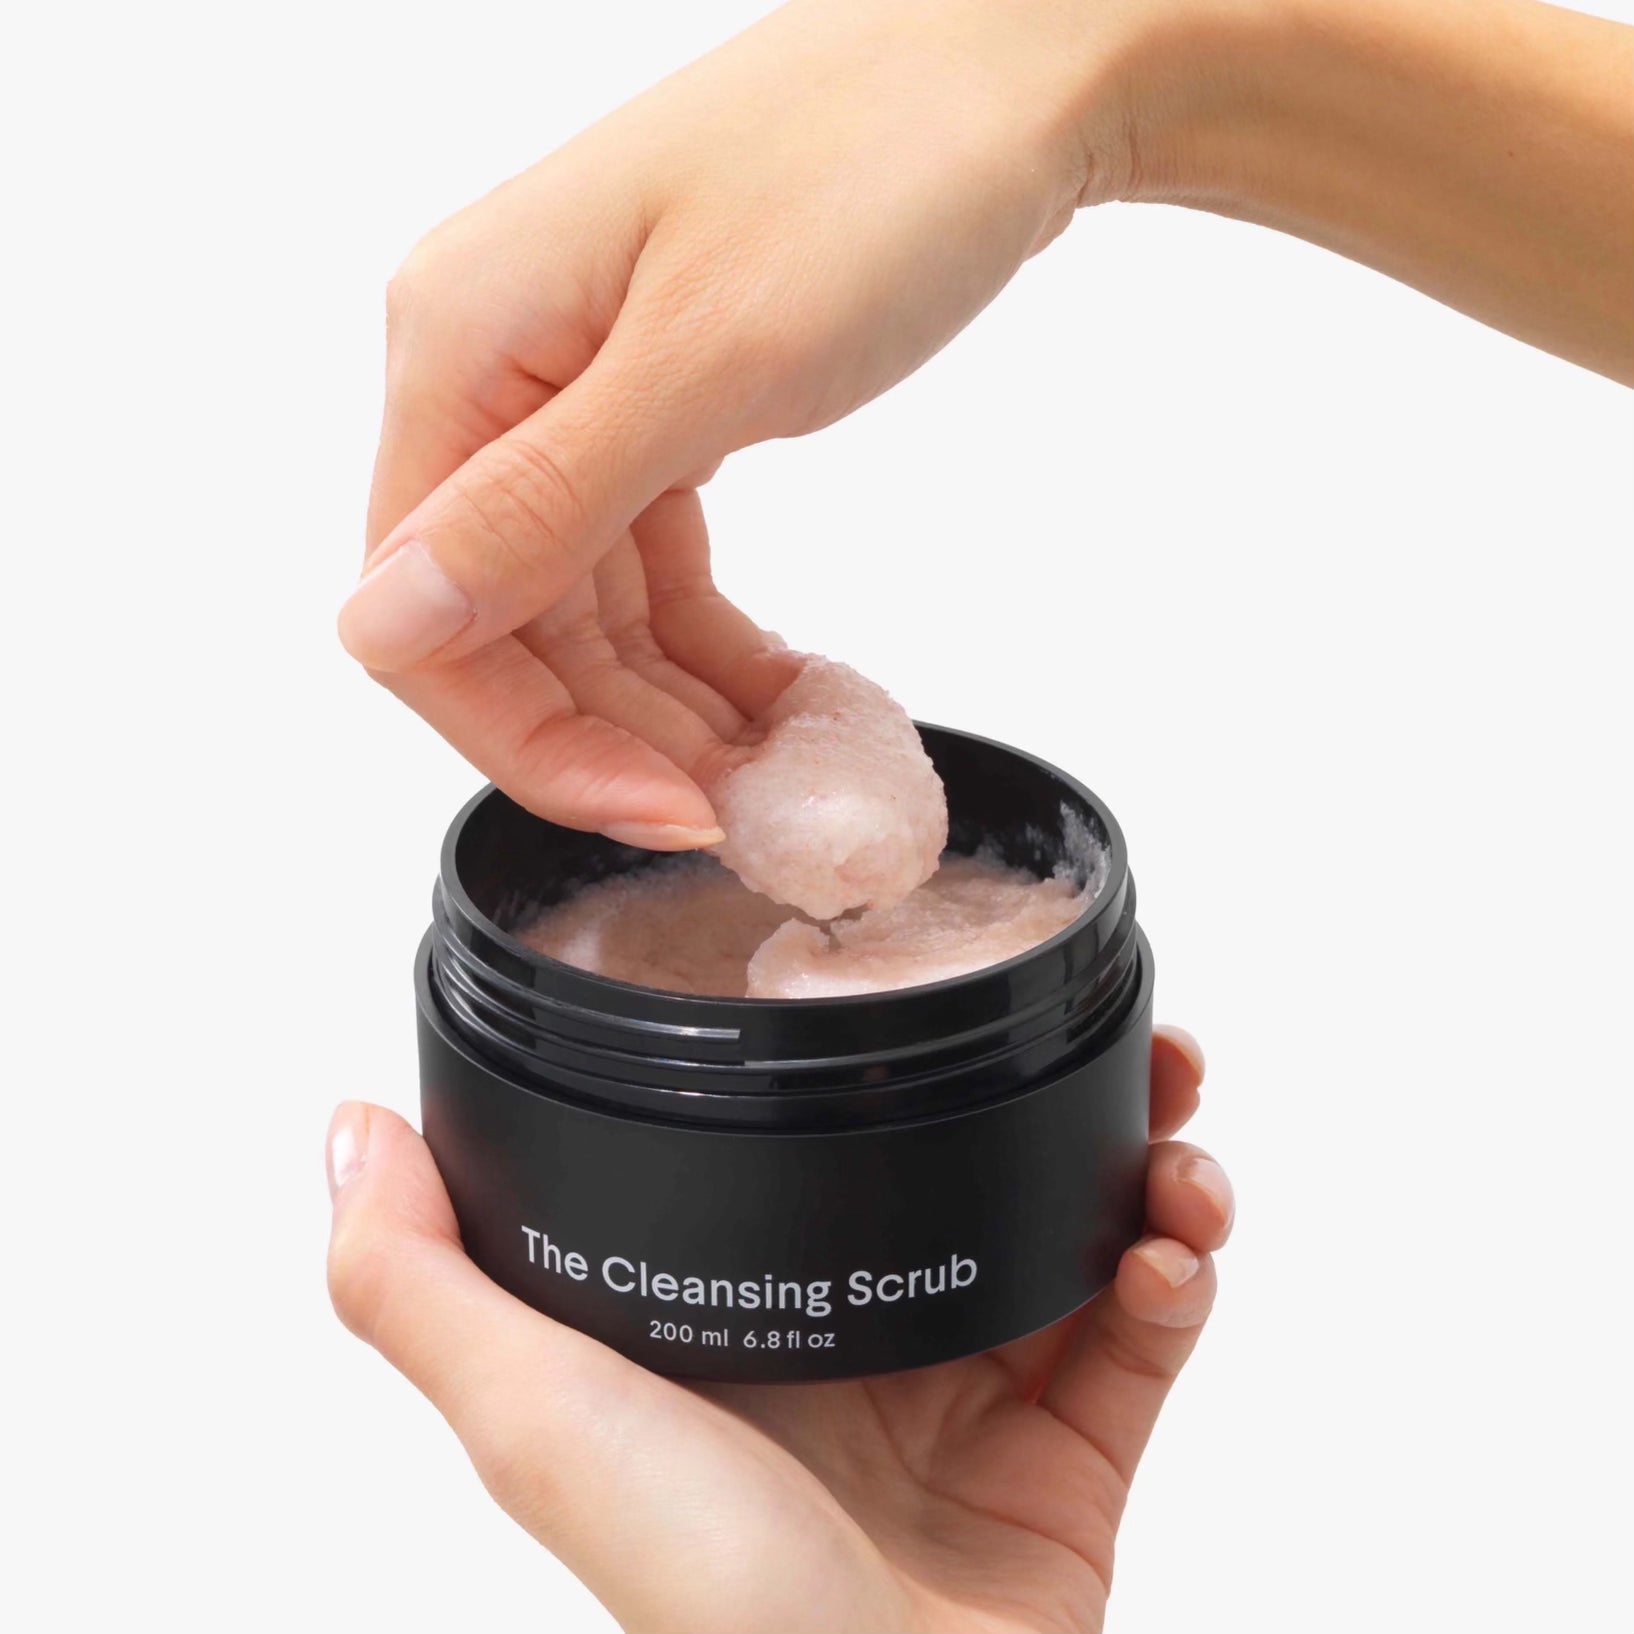 The Cleansing Scrub